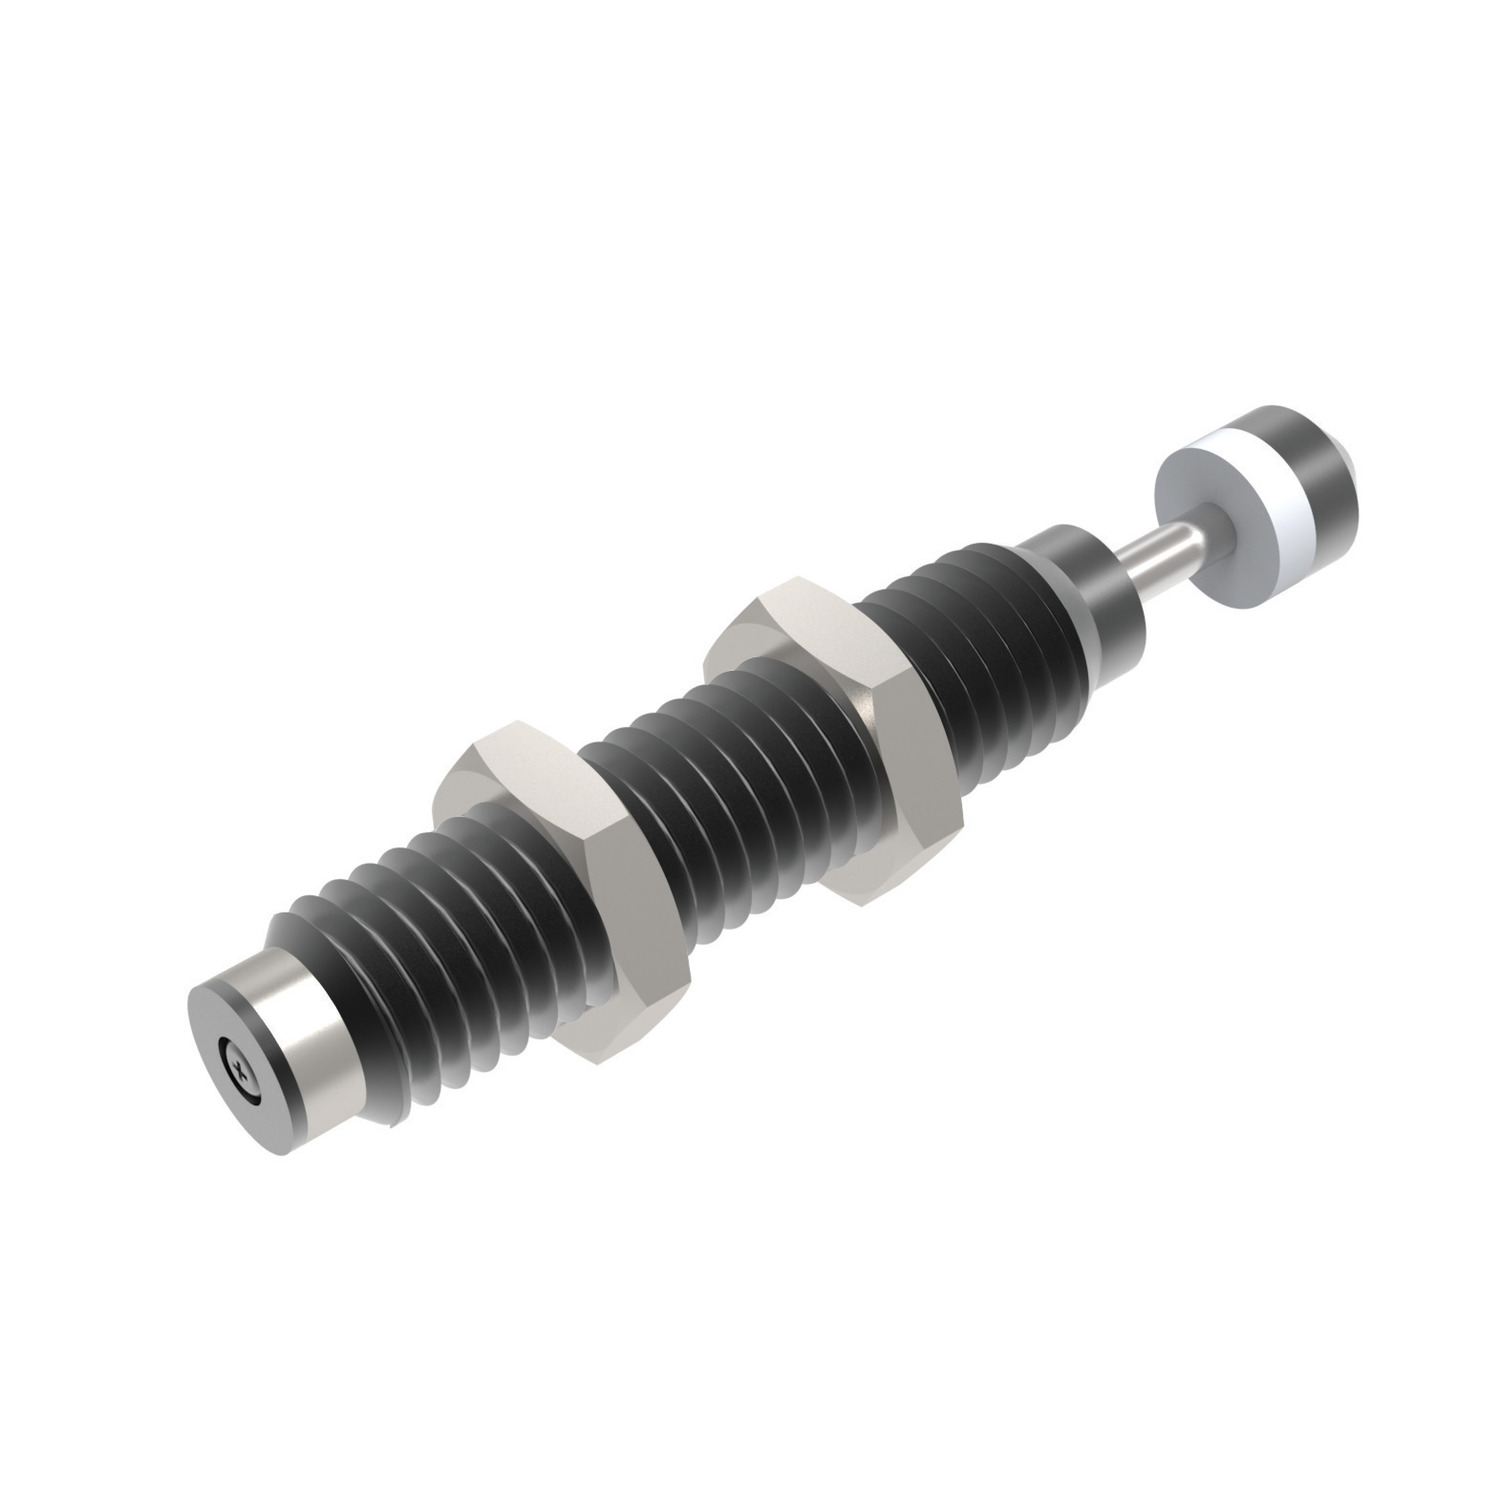 Product 68012, Shock Absorbers, Self Compensating M8 - M27, non-adjustable / 